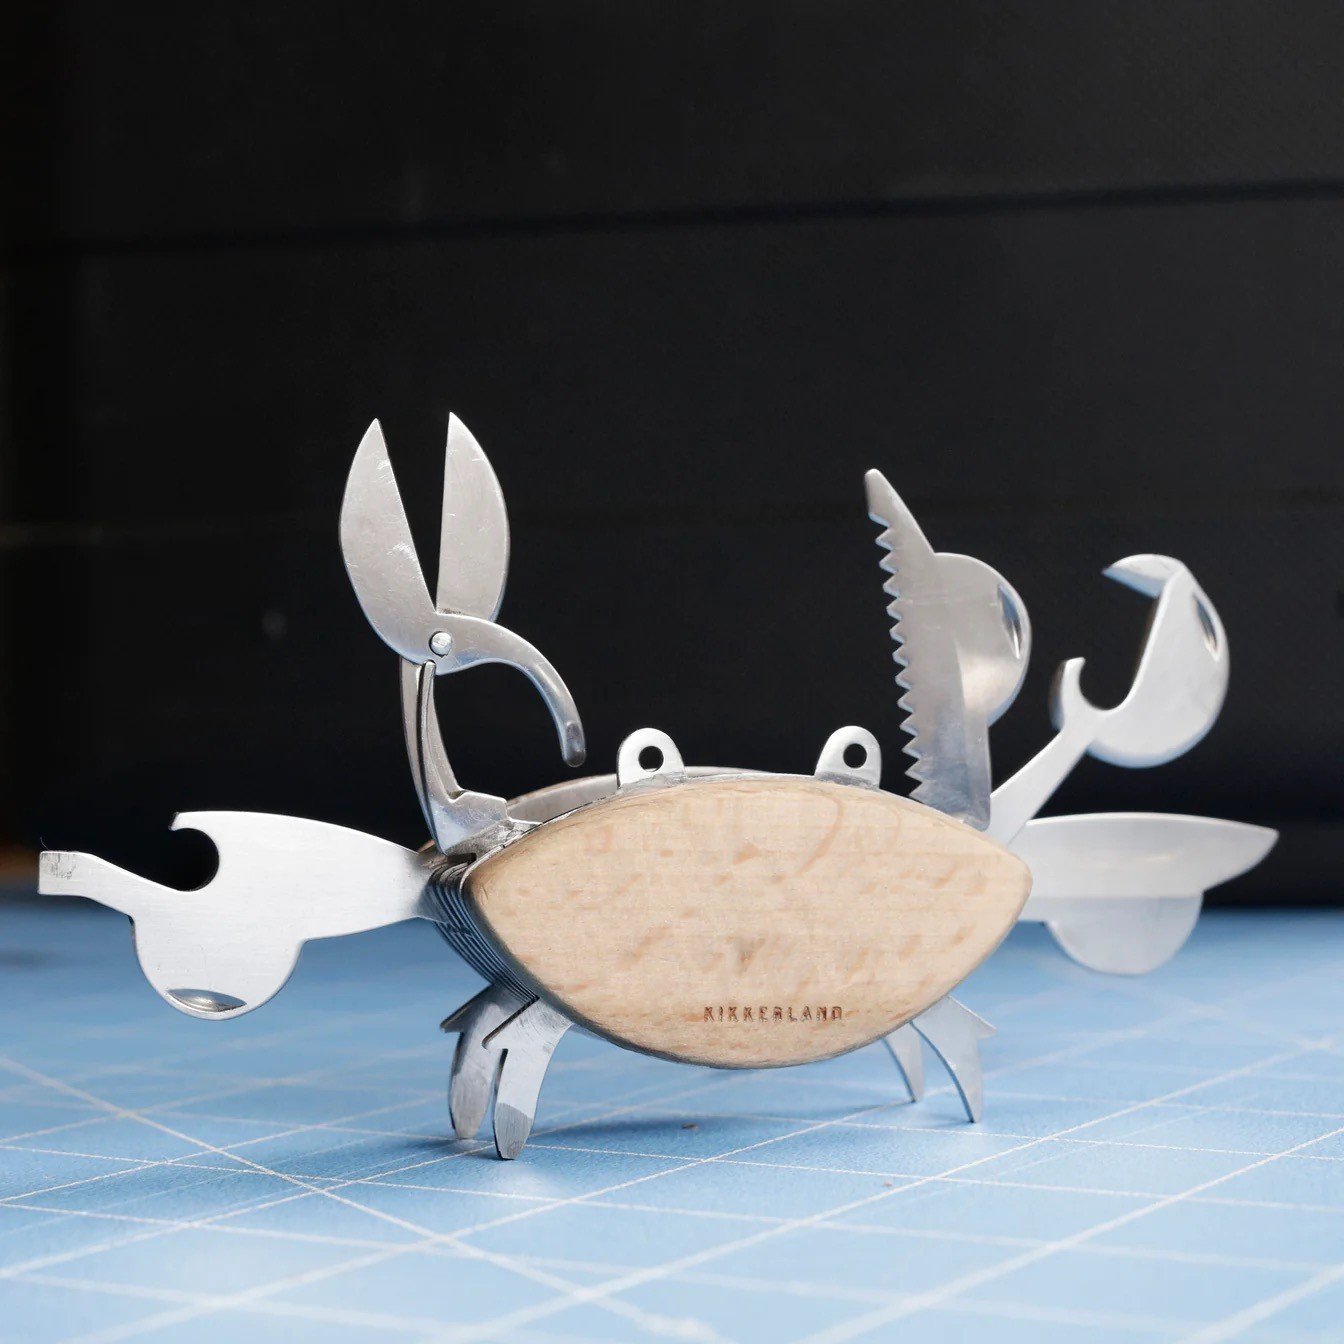 Crabby crabby crabby tool!⁠
a helpful friend, and so cute, too! ⁠
🦀😜 ⁠
⁠
⁠
⁠
⁠
⁠
#multitool #crablovers #capitolavillage #santacruzlife